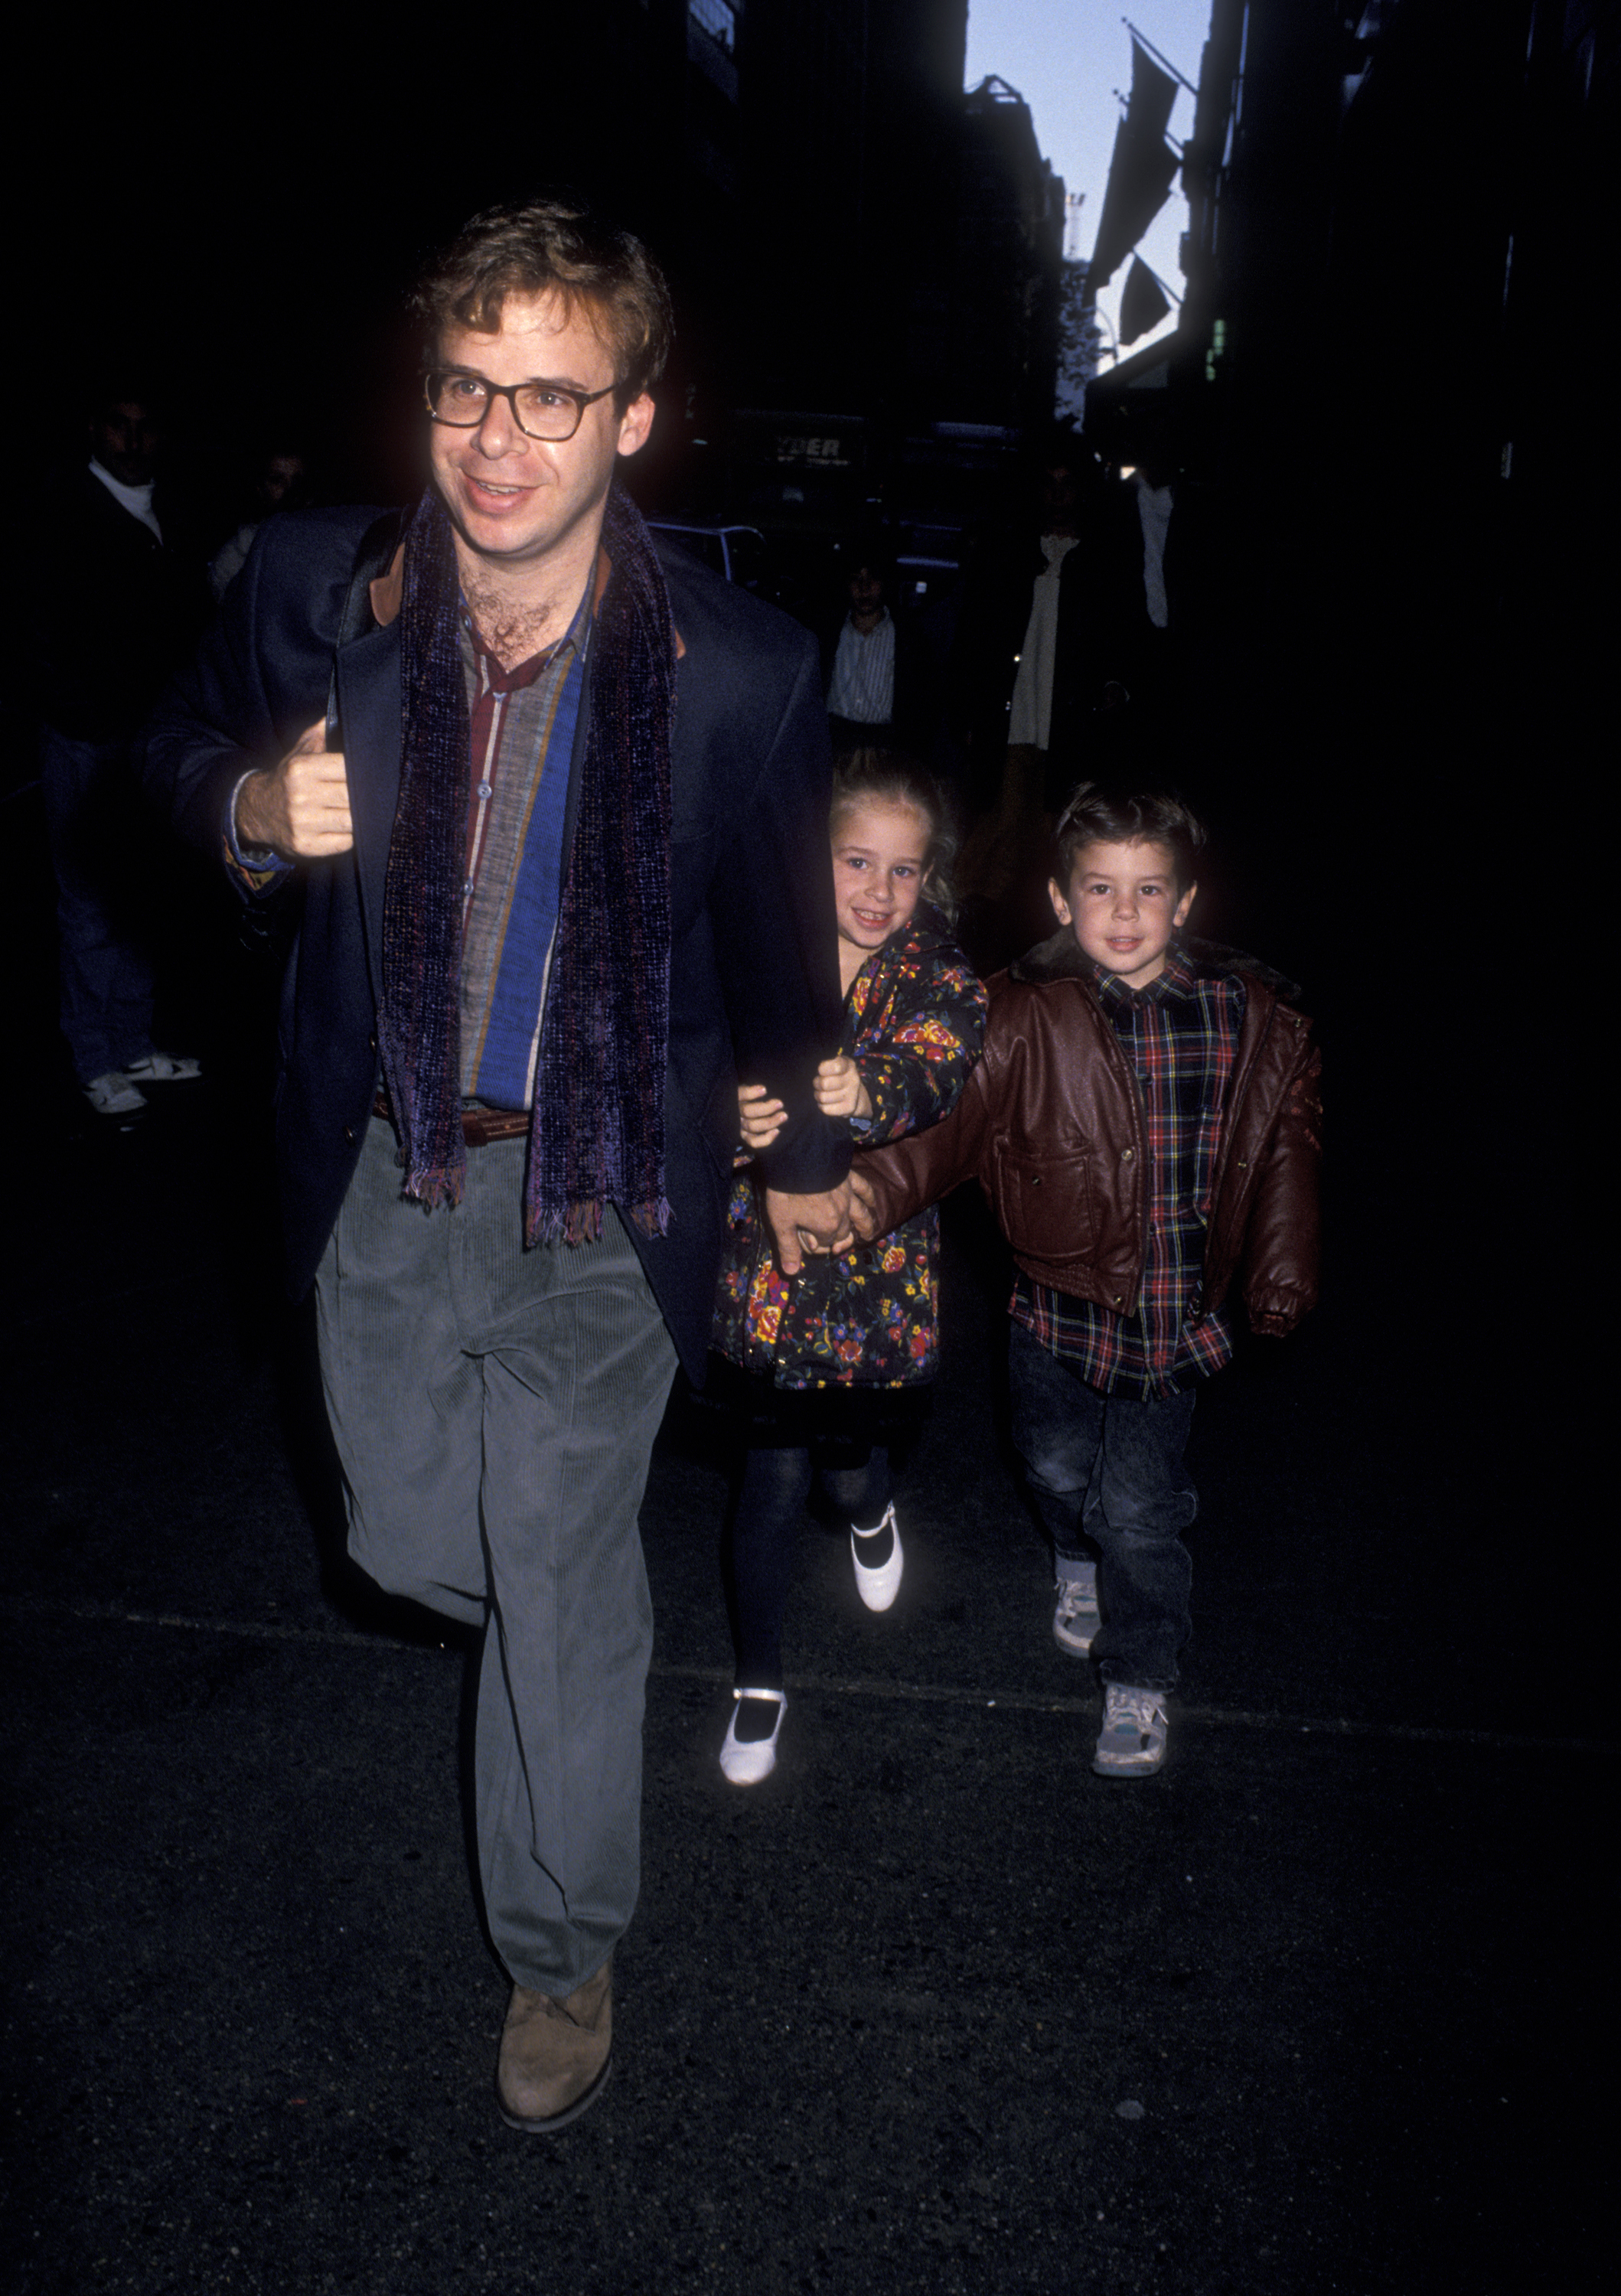 Rick Moranis and children attend the premiere of "The Nutcracker," 1993 | Source: Getty Images